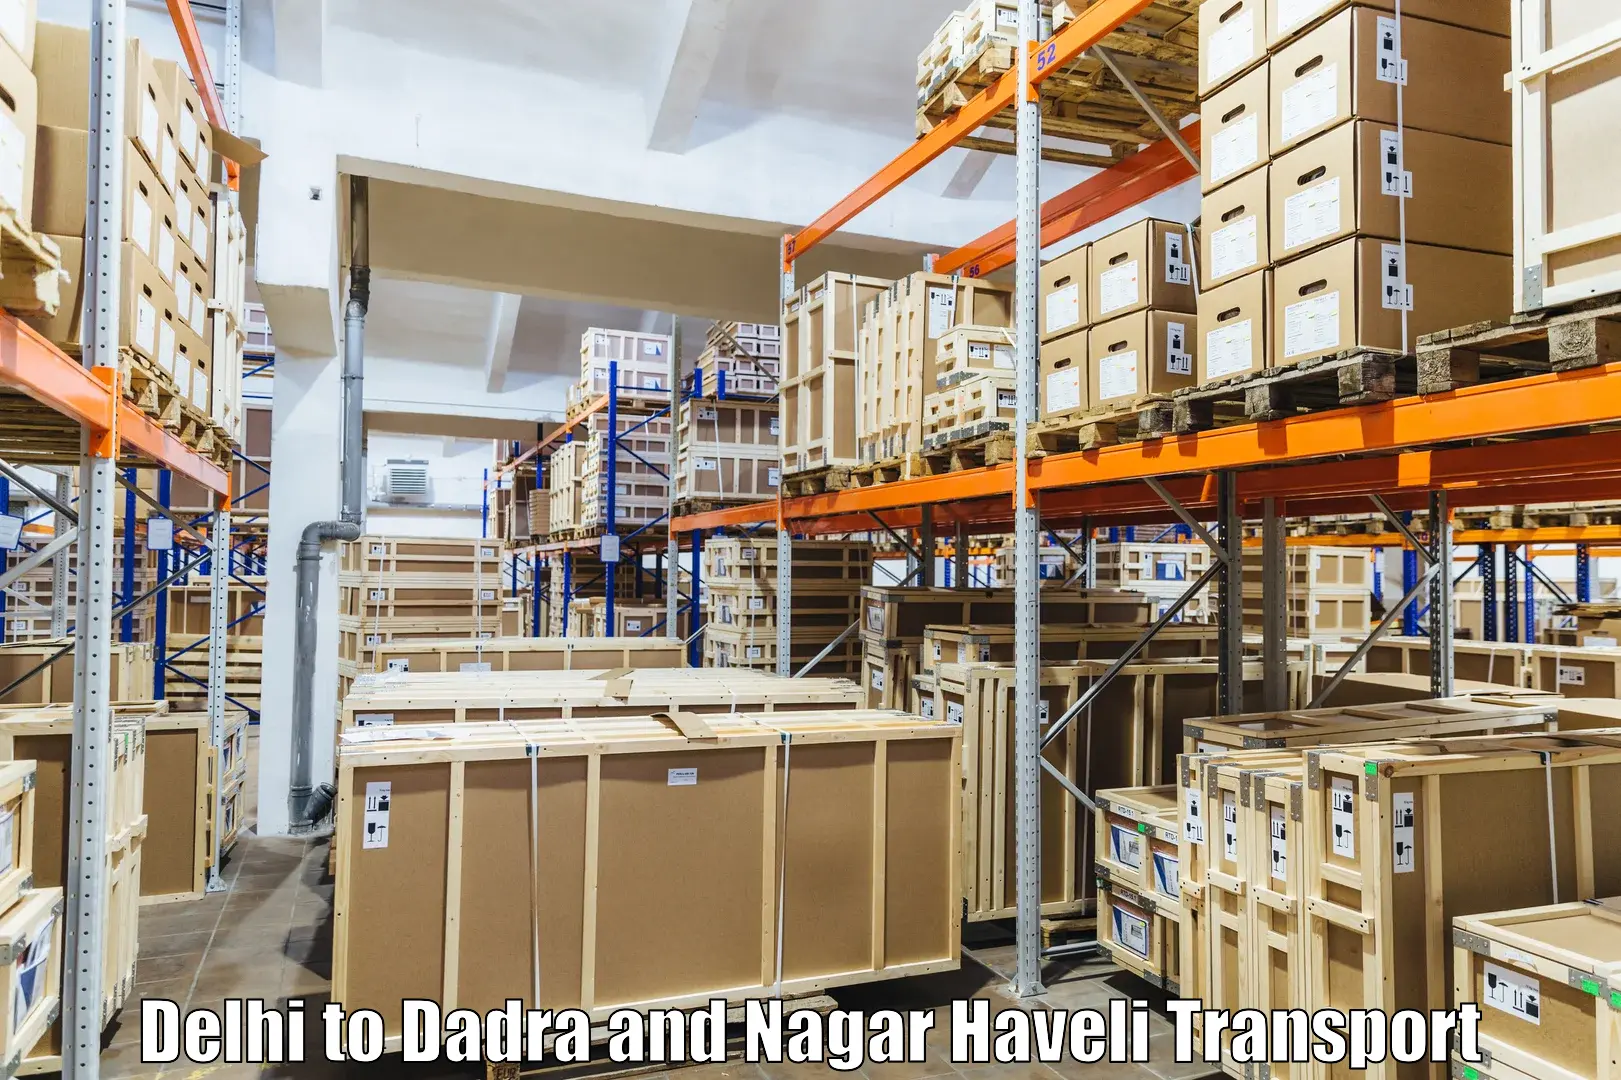 Truck transport companies in India in Delhi to Dadra and Nagar Haveli